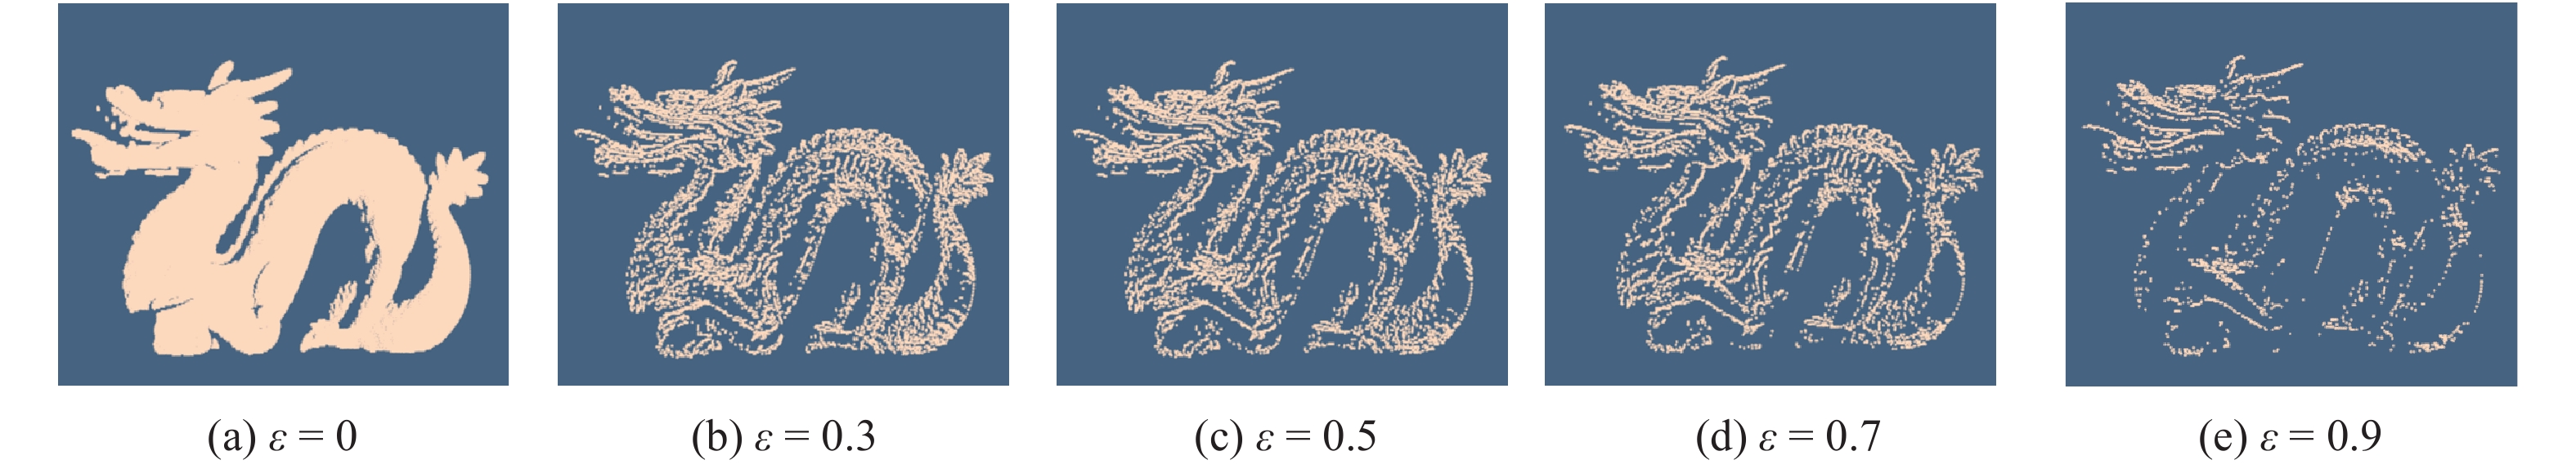 Feature point extraction of Dragon model under different artificially selected thresholds Dragon模型在人为选取不同阈值下的特征点提取情况